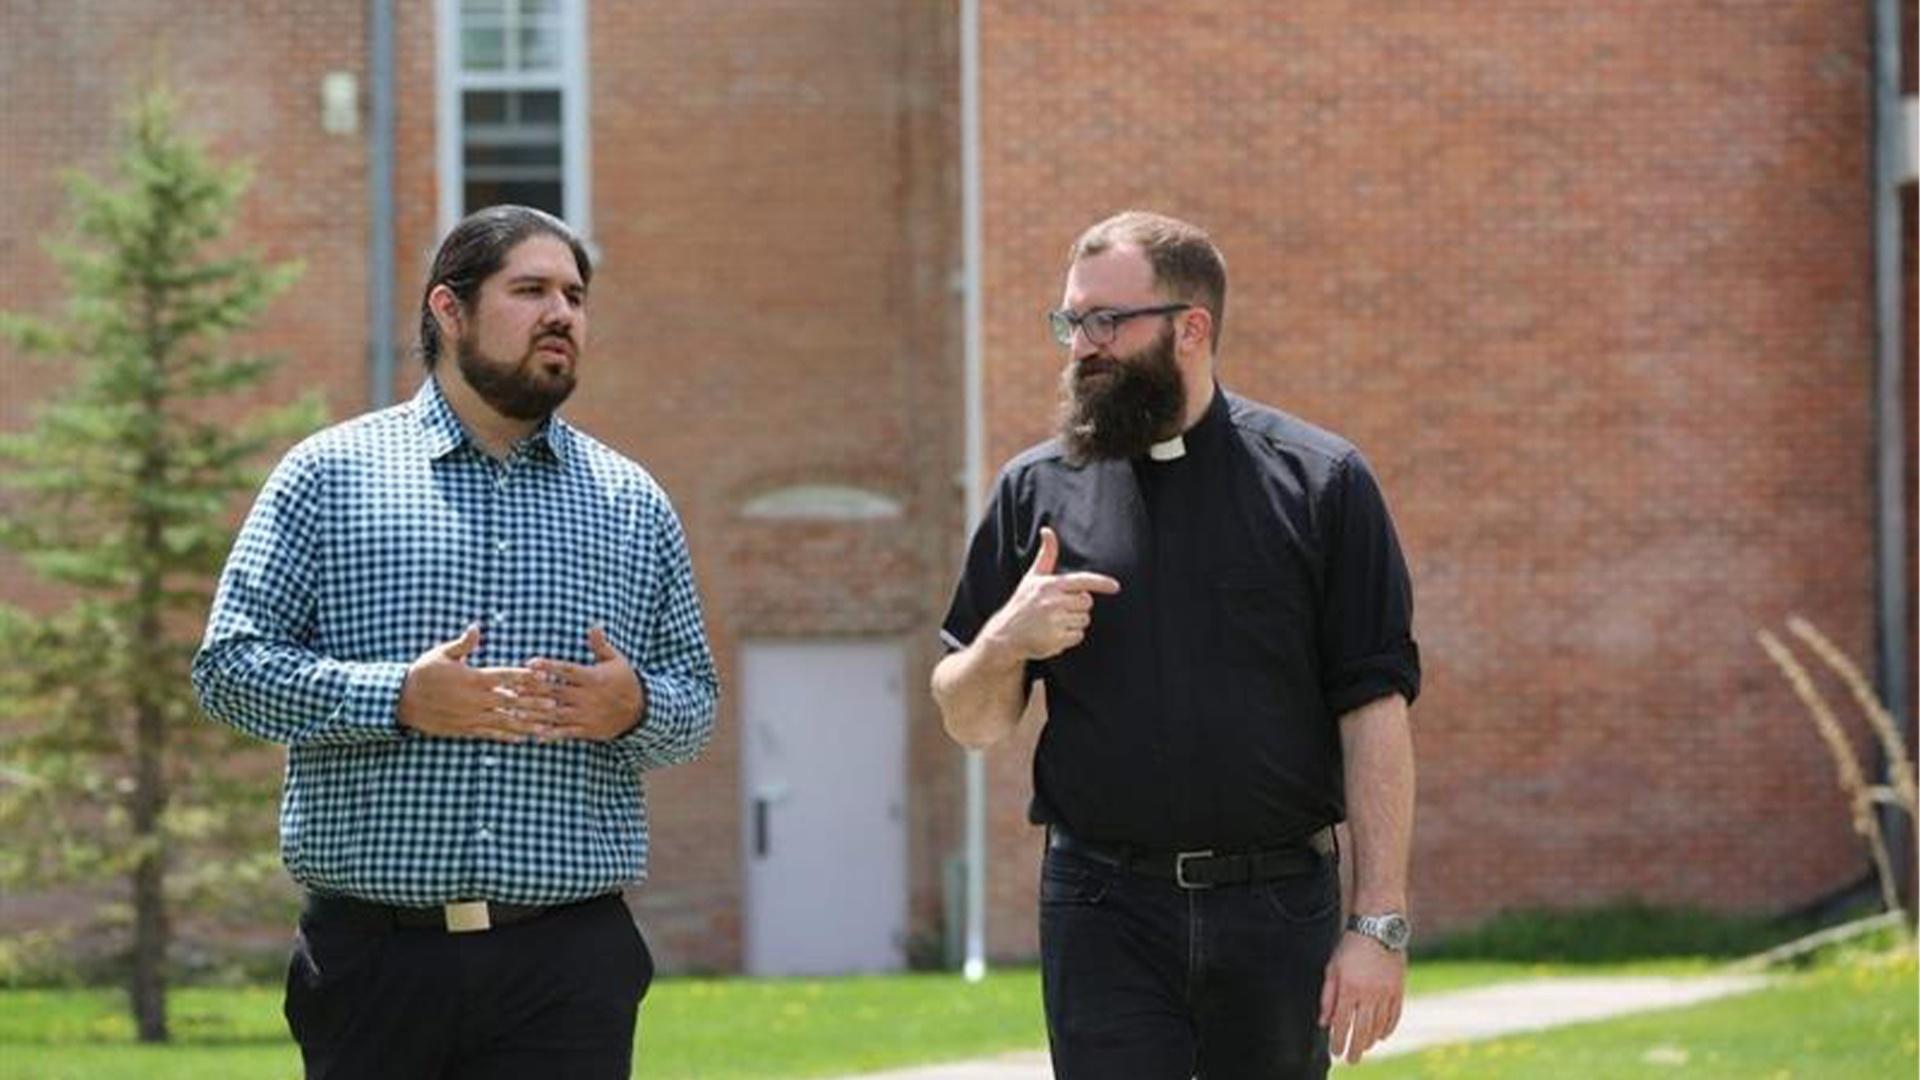 Maka Black Elk and Fr. Brad Held work together to uncover truths about their institution's past.